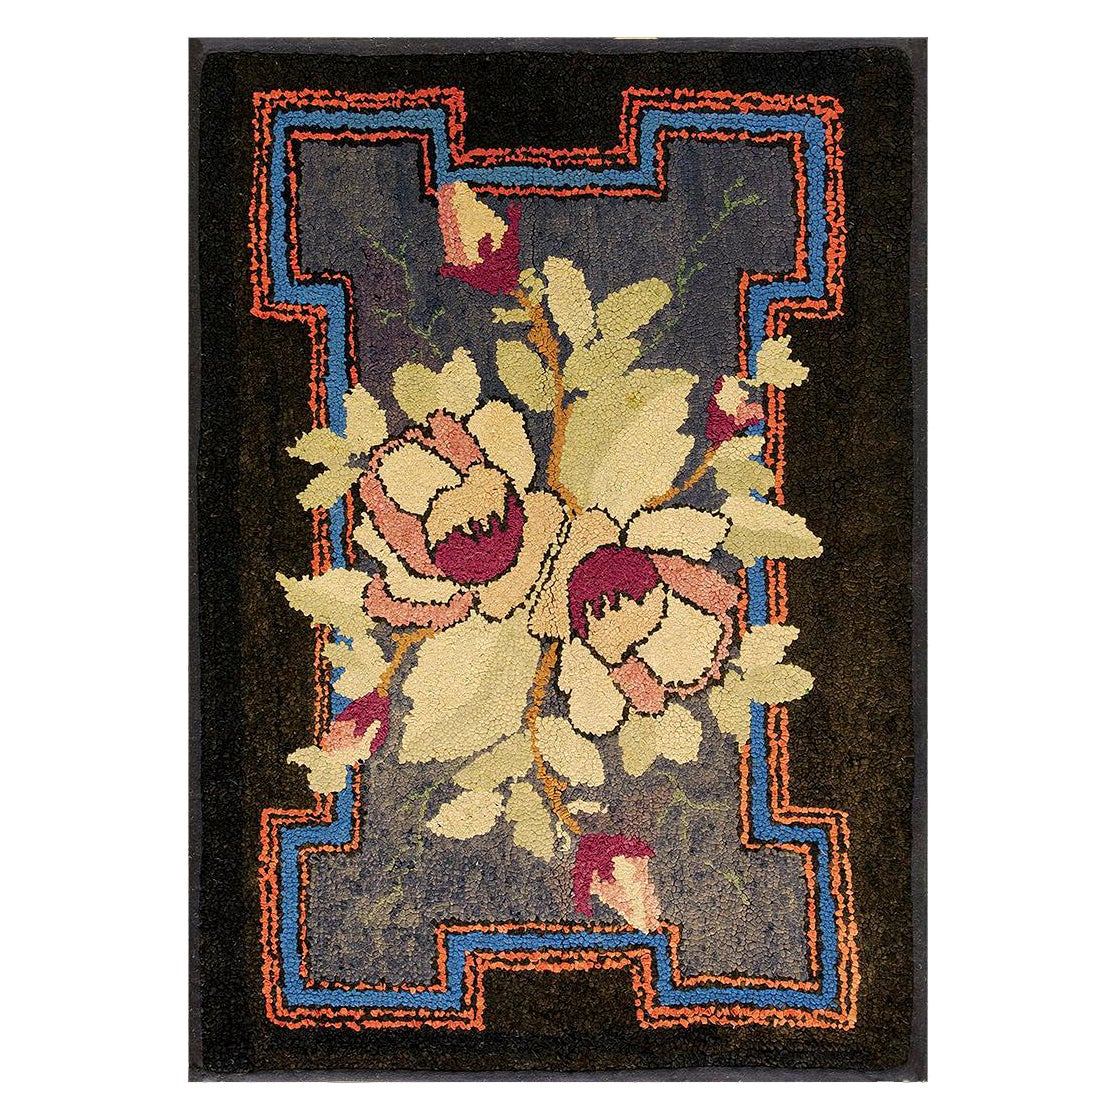 Early 20th Century American Hooked Rug ( 2'3" x 3' - 68 x 92 ) 